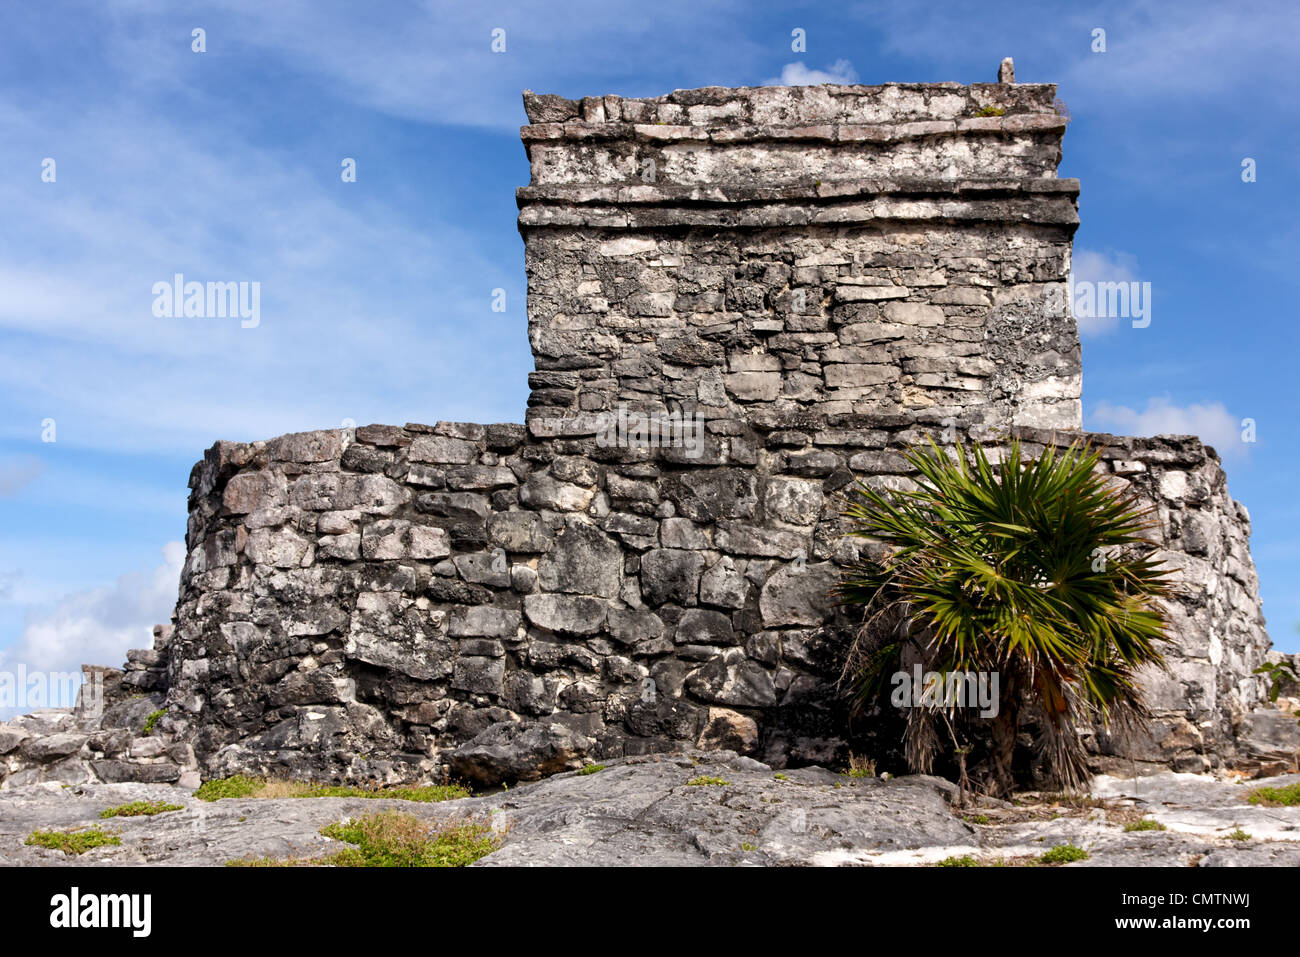 Mayan ruins at the archaeological site of Tulum, Quintana Roo, Mexico. Stock Photo